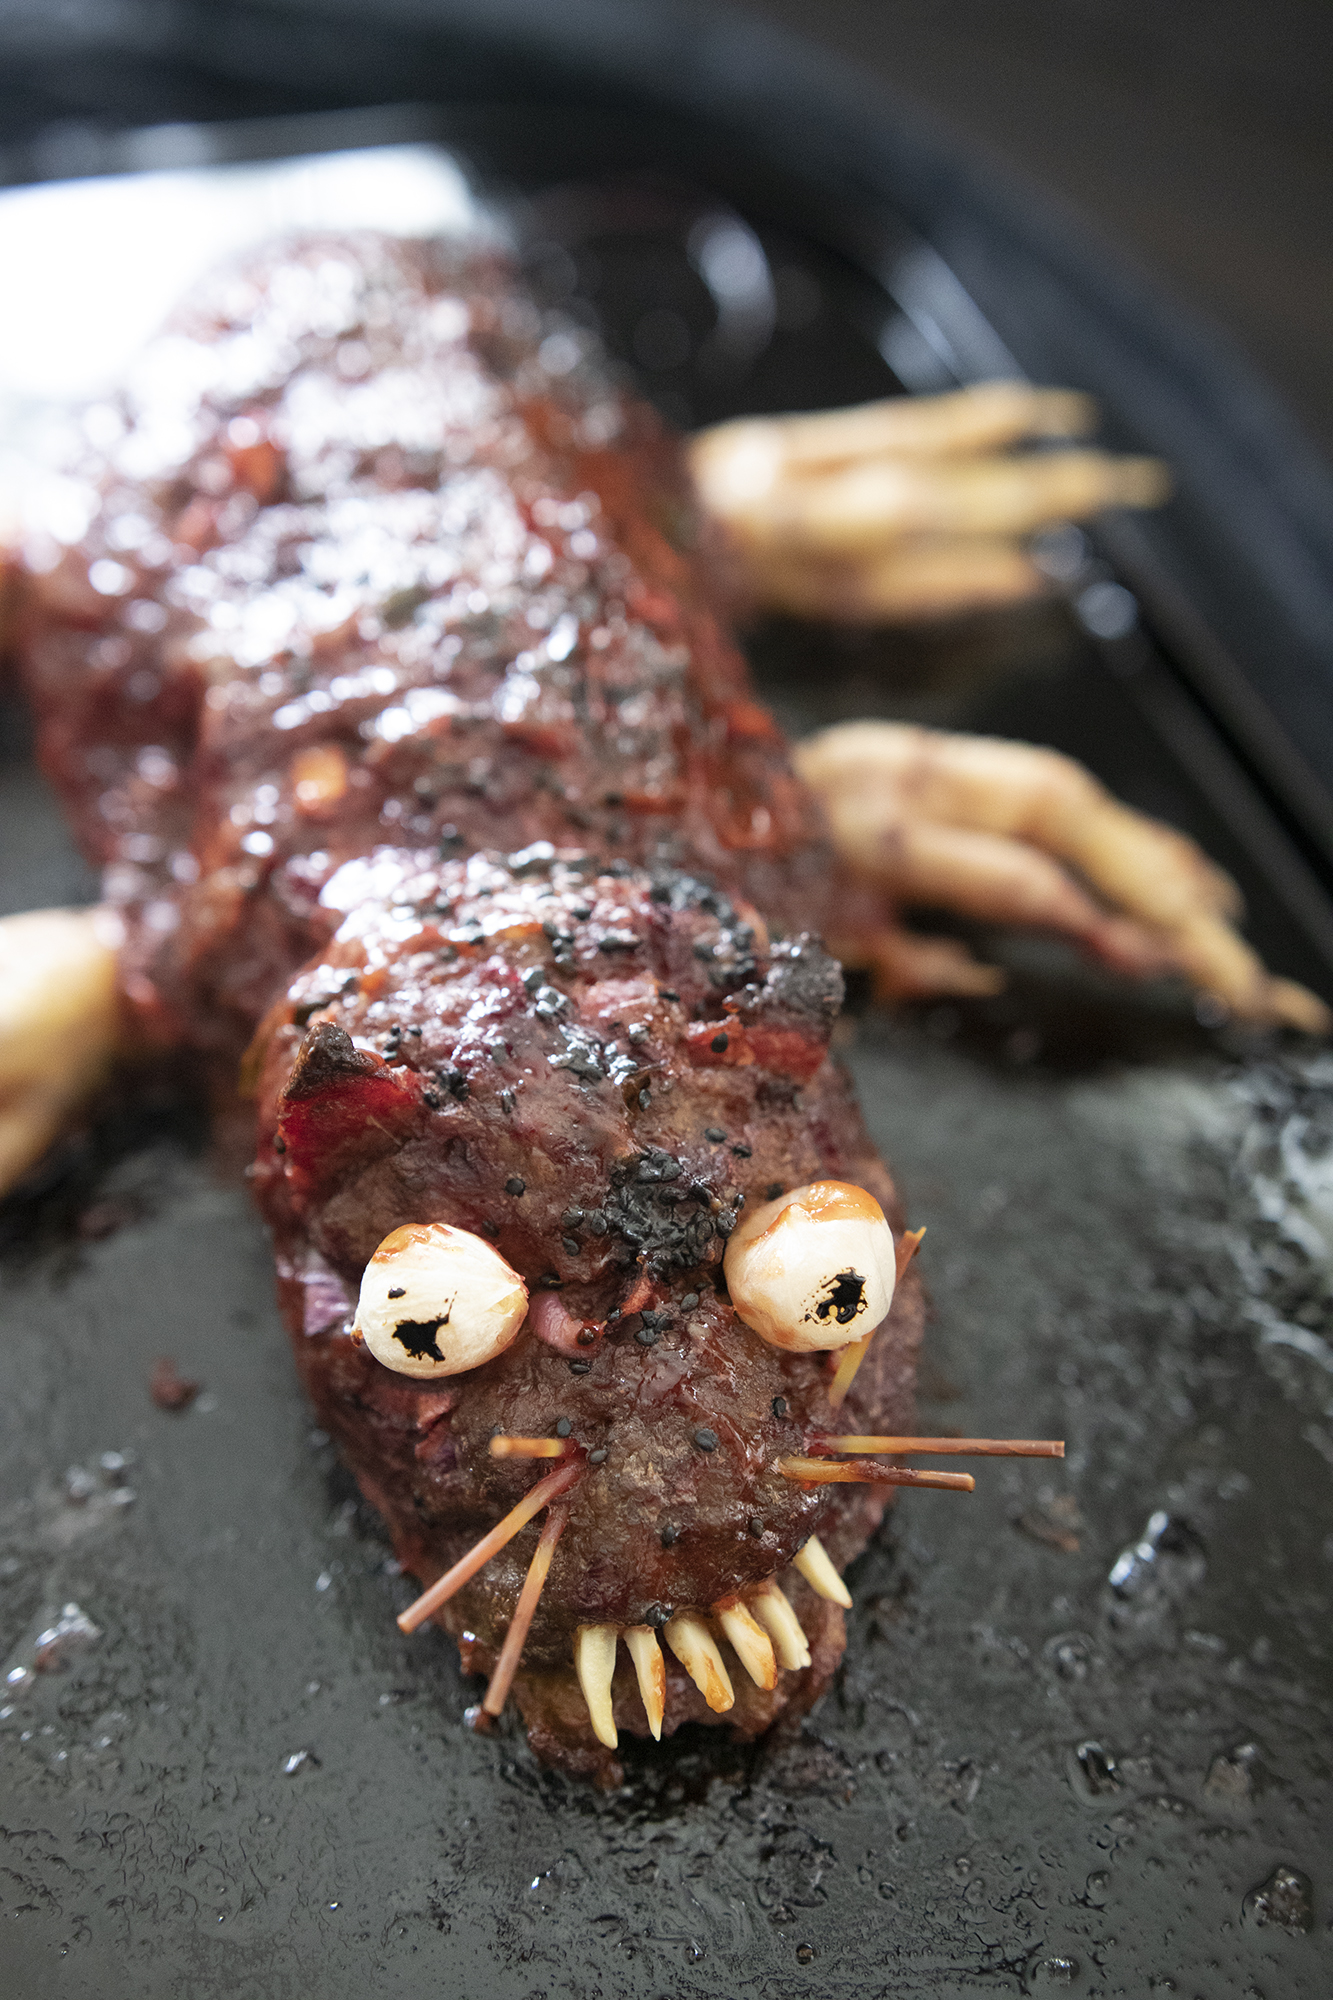 Halloween Beet Rat - Meatloaf made with Beets in a rat shape